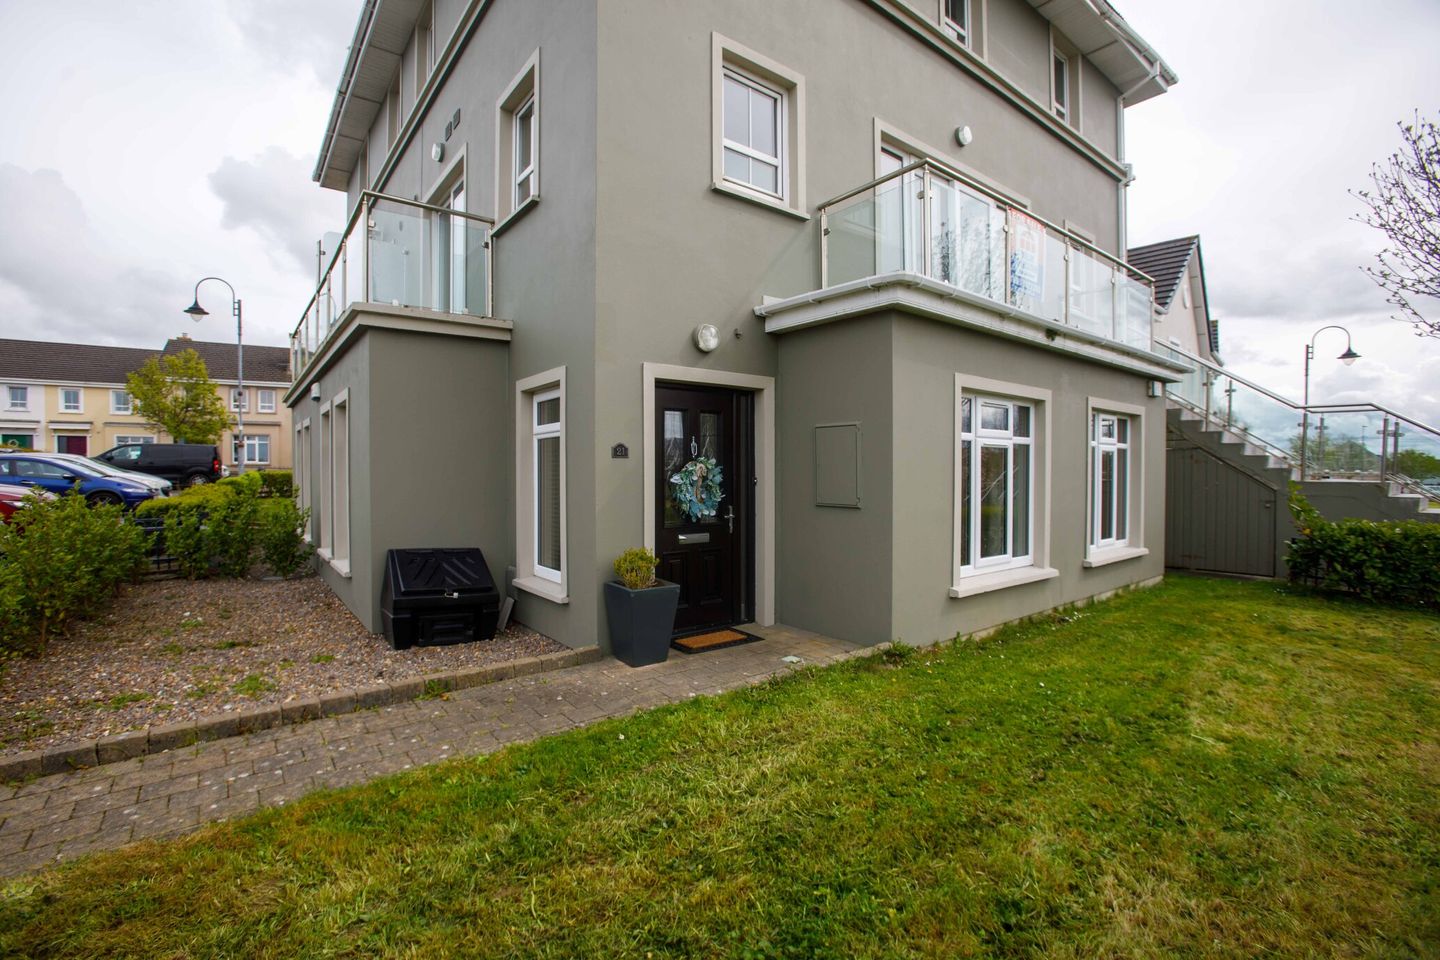 21 Cuil Fuine, Lisloose, Tralee, Co. Kerry, V92F380